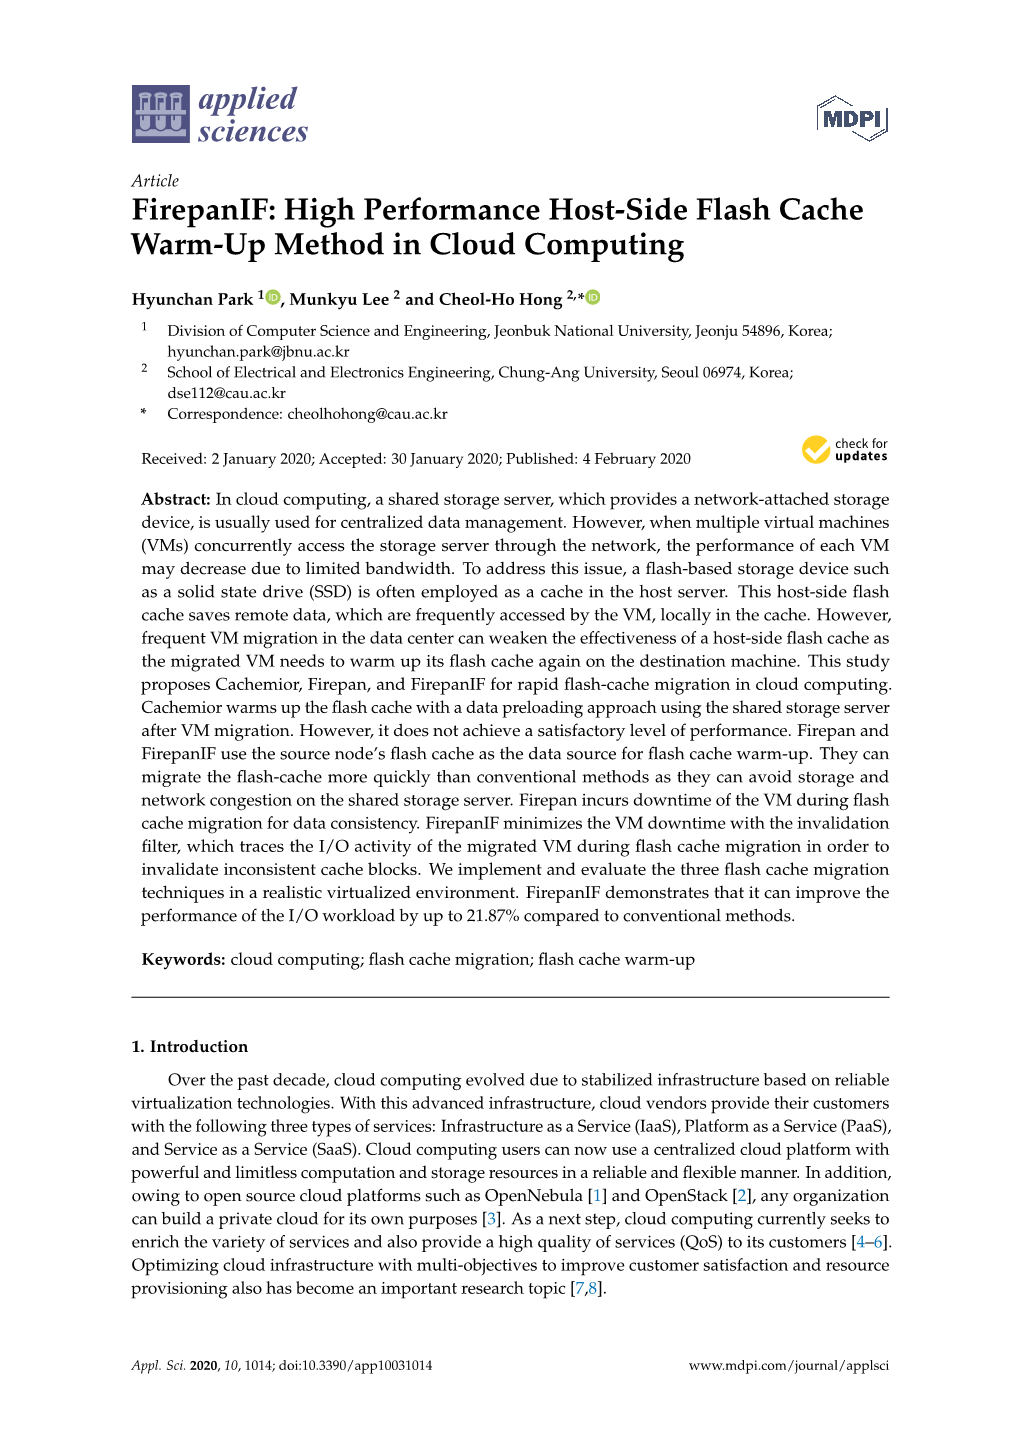 High Performance Host-Side Flash Cache Warm-Up Method in Cloud Computing